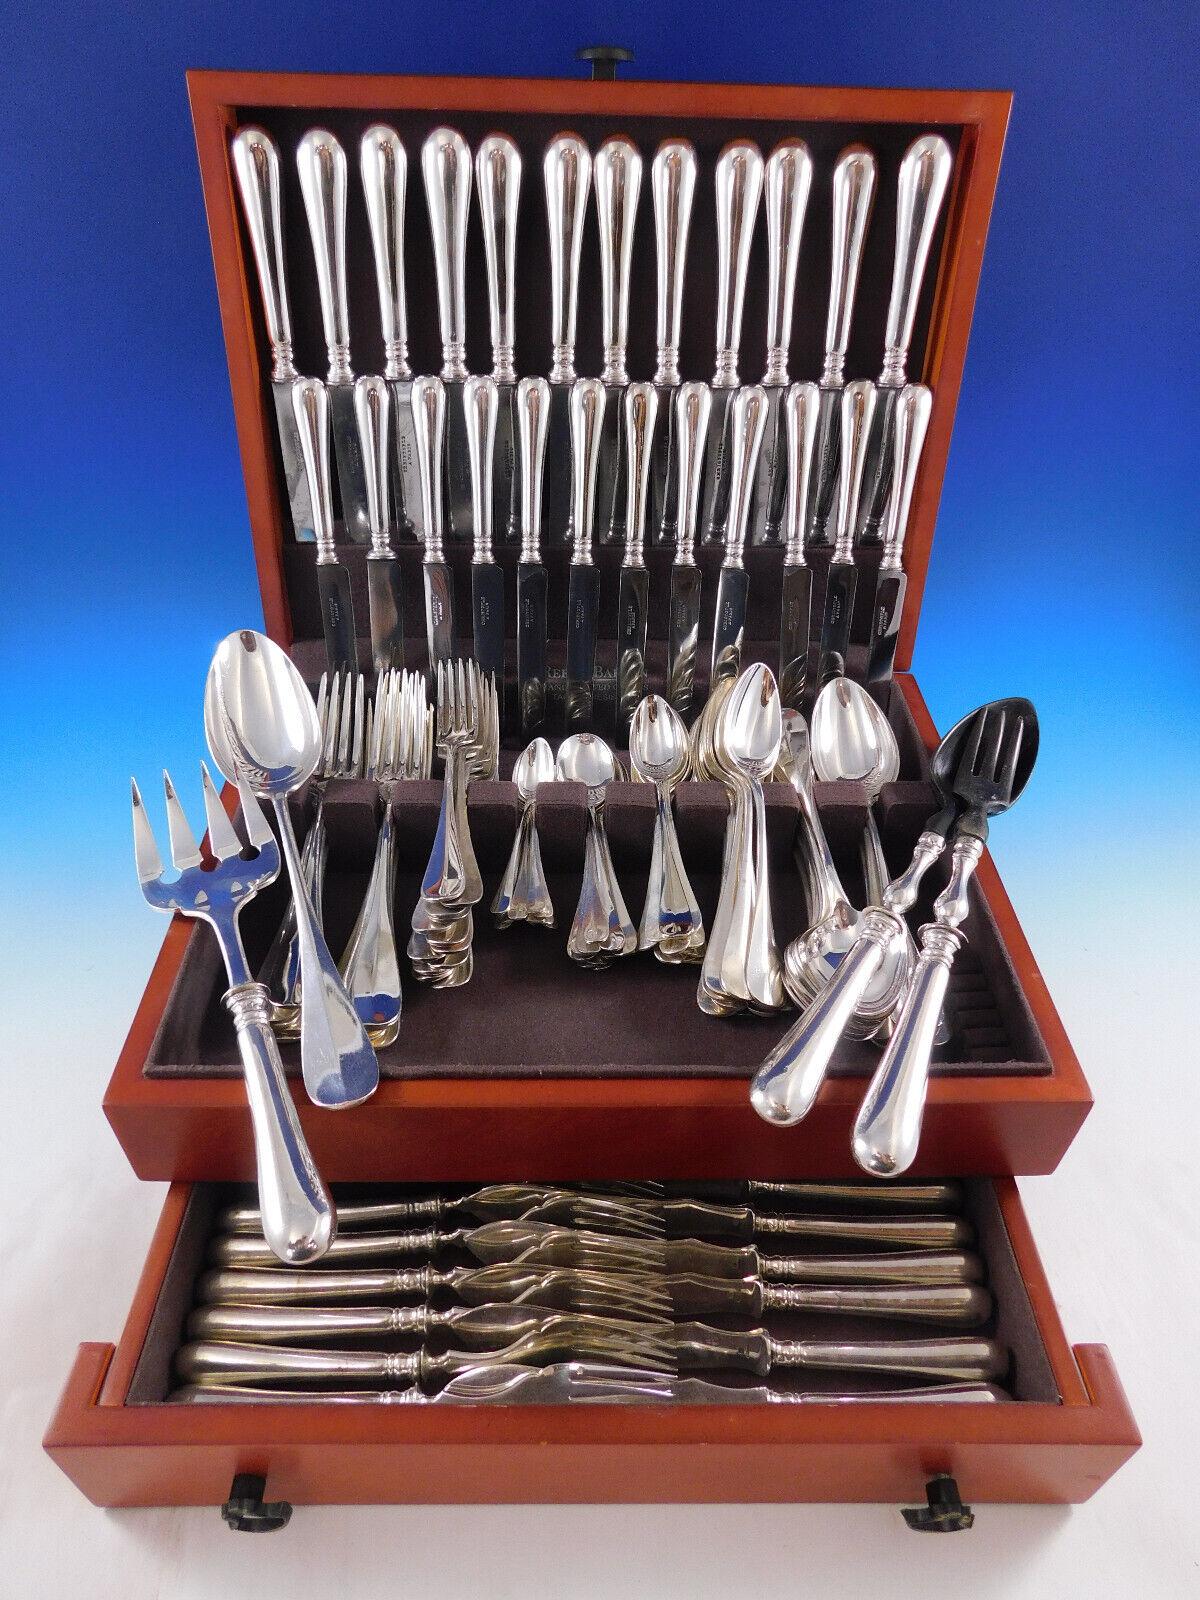 Large Fidelio by Christofle France Silverplate Flatware set - 75 pieces. This set includes:

12 Dinner Size Knives, 10 1/2